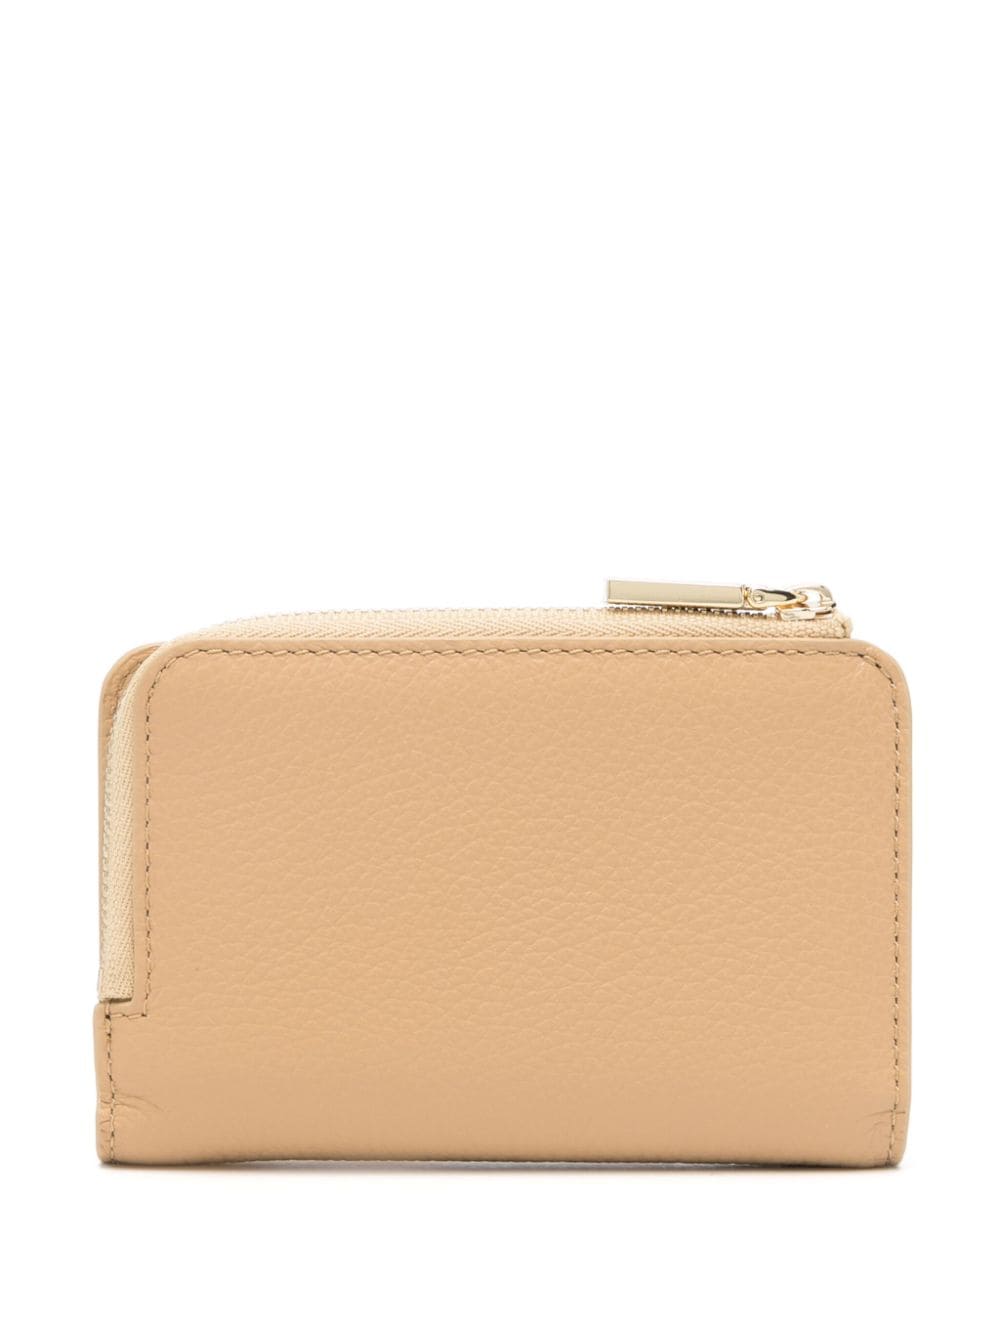 Shop Coccinelle Small Metallic Soft Leather Wallet In N24 Fresh Beige